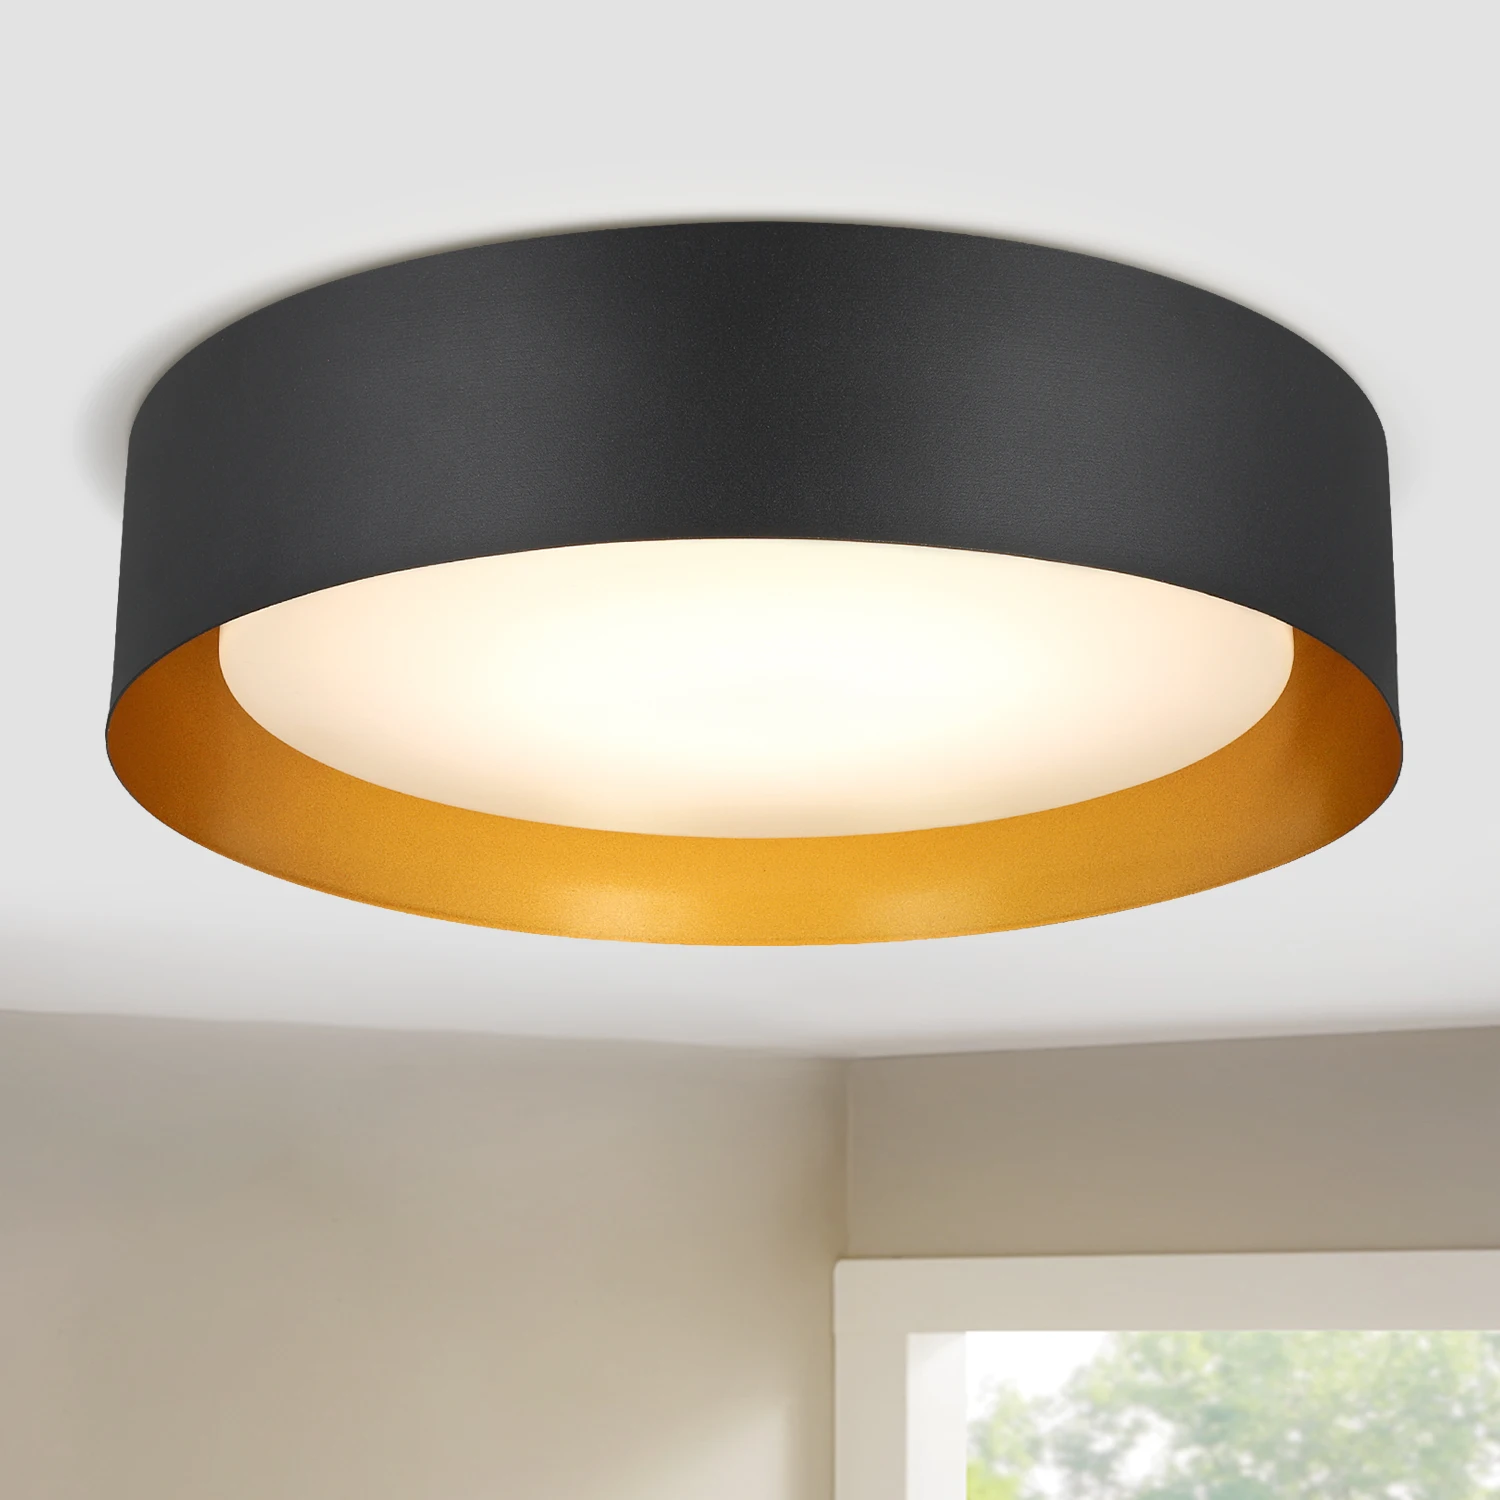 Depuley 30W Dimmable LED Flush Mount Ceiling Light 15inch Modern Close to Ceiling Light Fixture for Bedroom Living Room